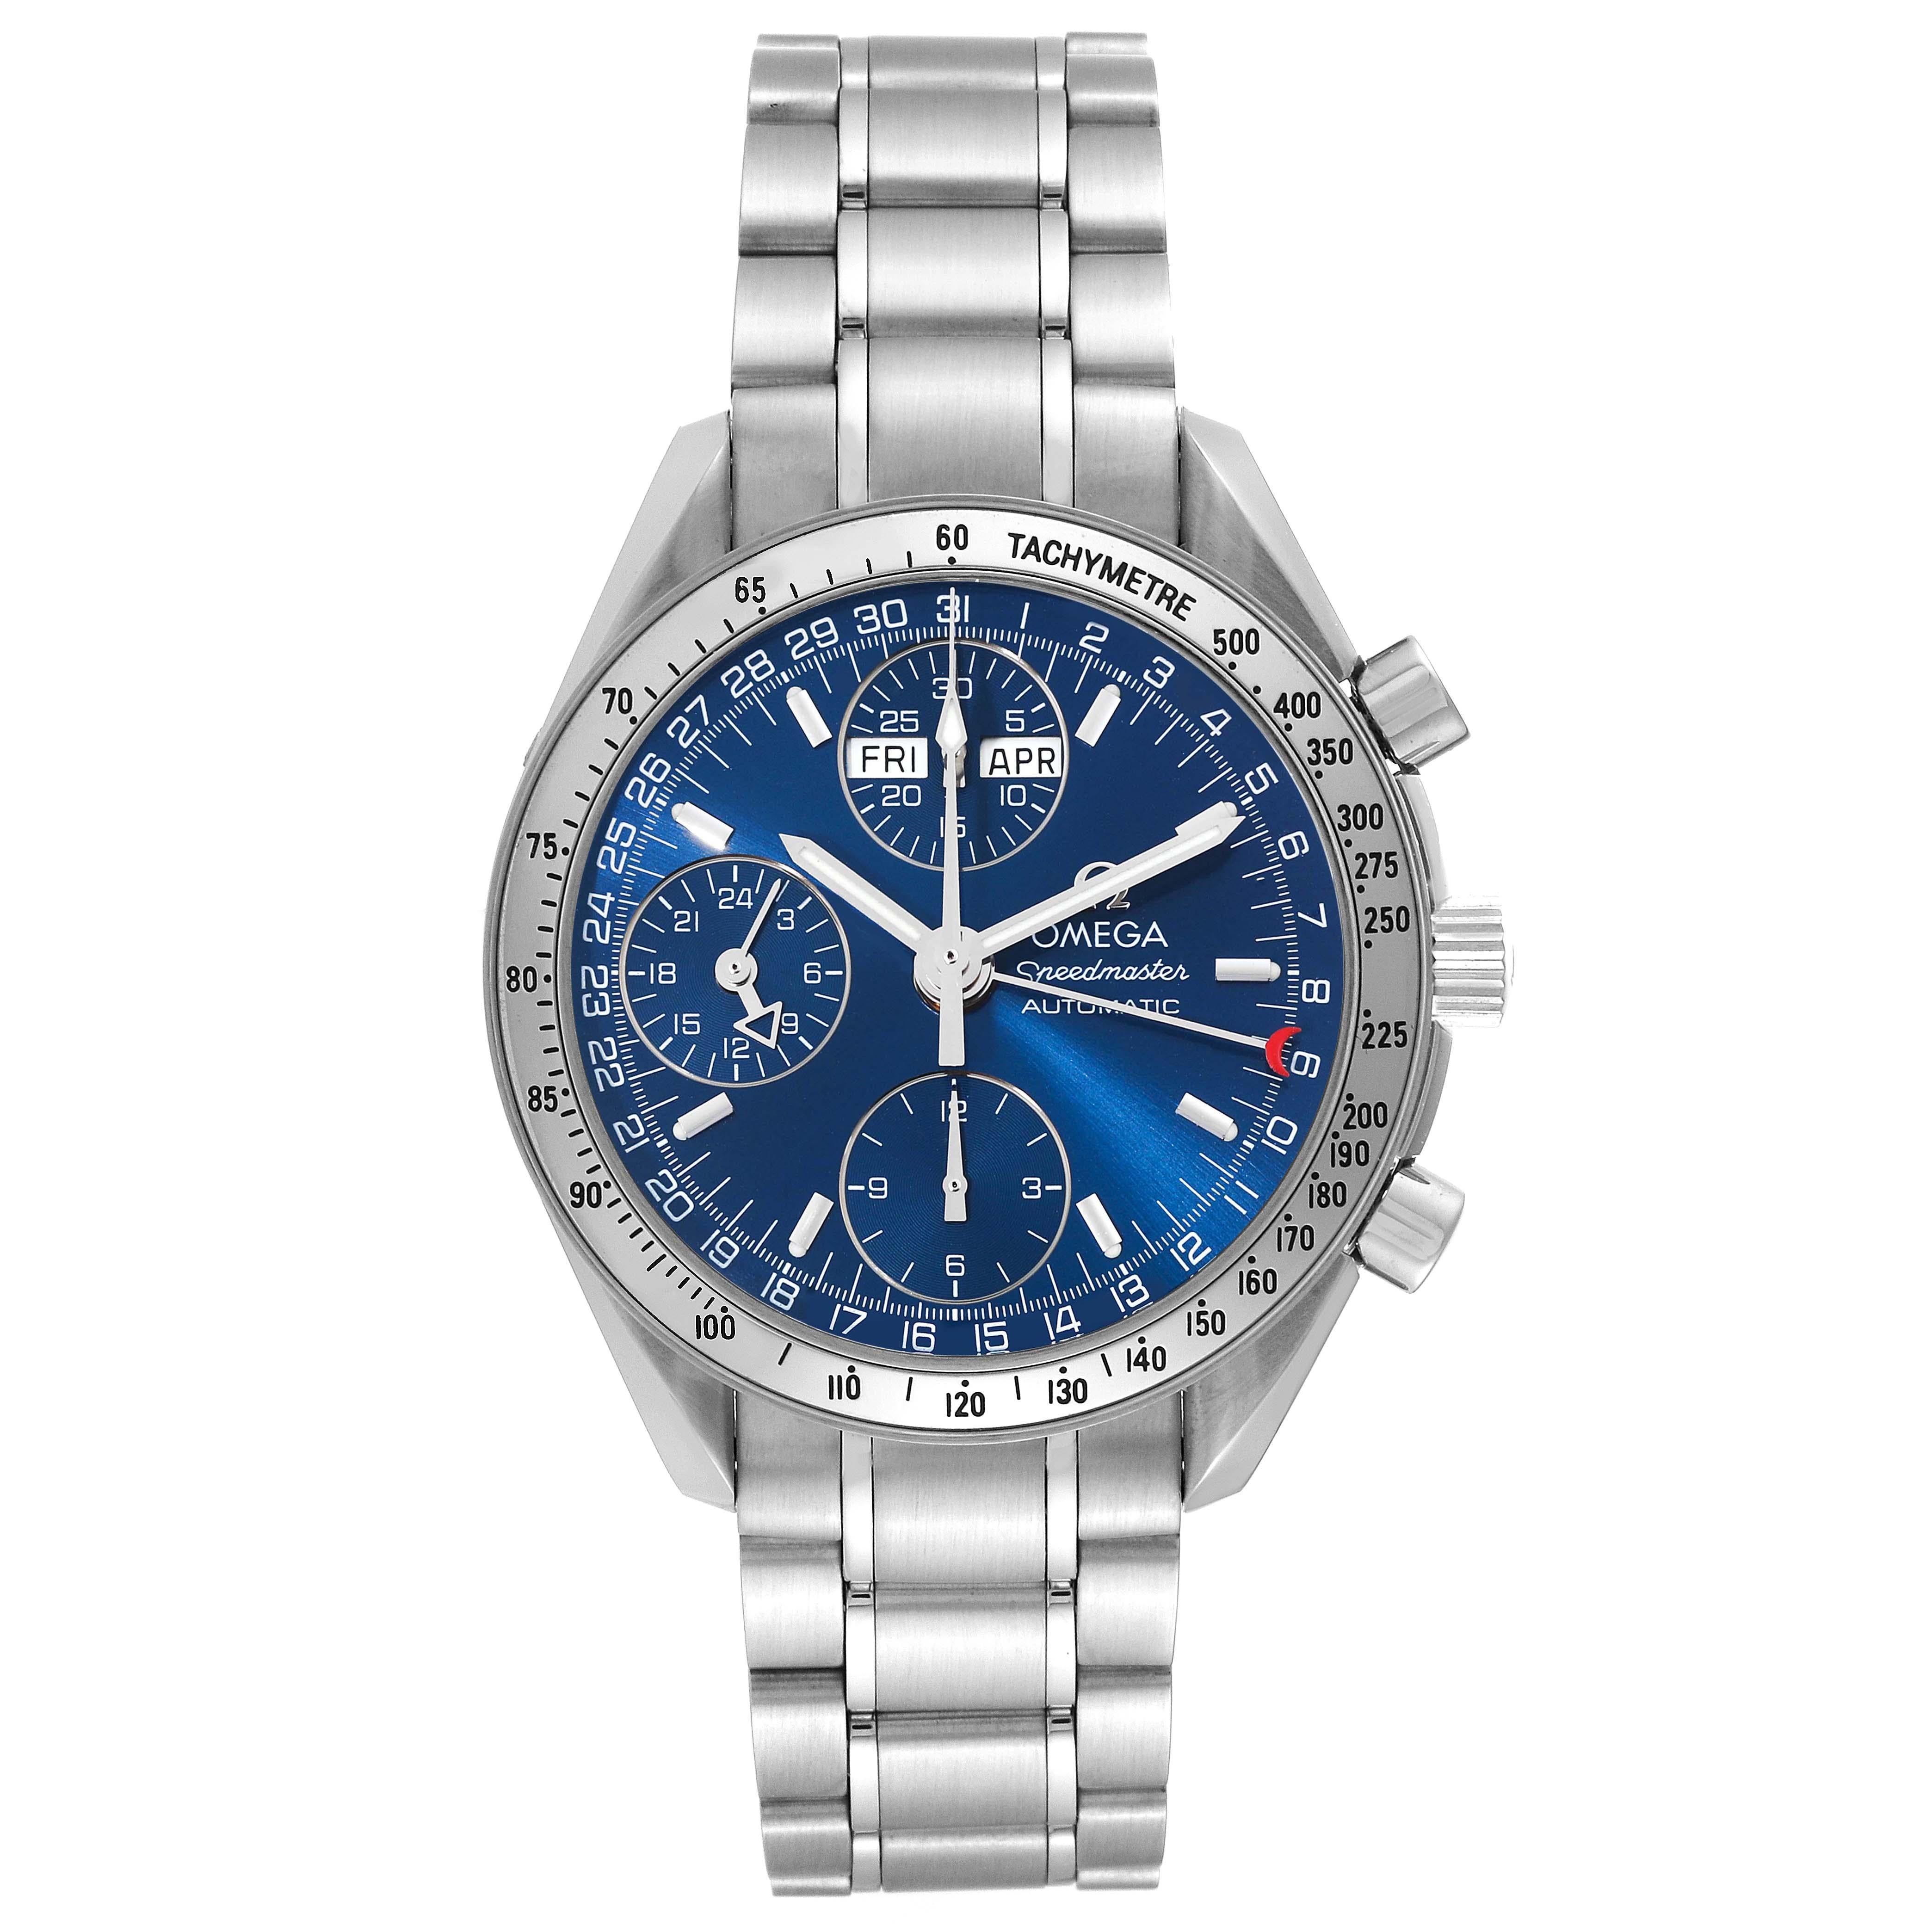 Omega Speedmaster Day-Date 39 Blue Dial Steel Mens Watch 3523.80.00 Box Card. Automatic self-winding chronograph movement. Day, date, and month indications. Stainless steel round case 39.0 mm in diameter. Polished stainless steel bezel with engraved